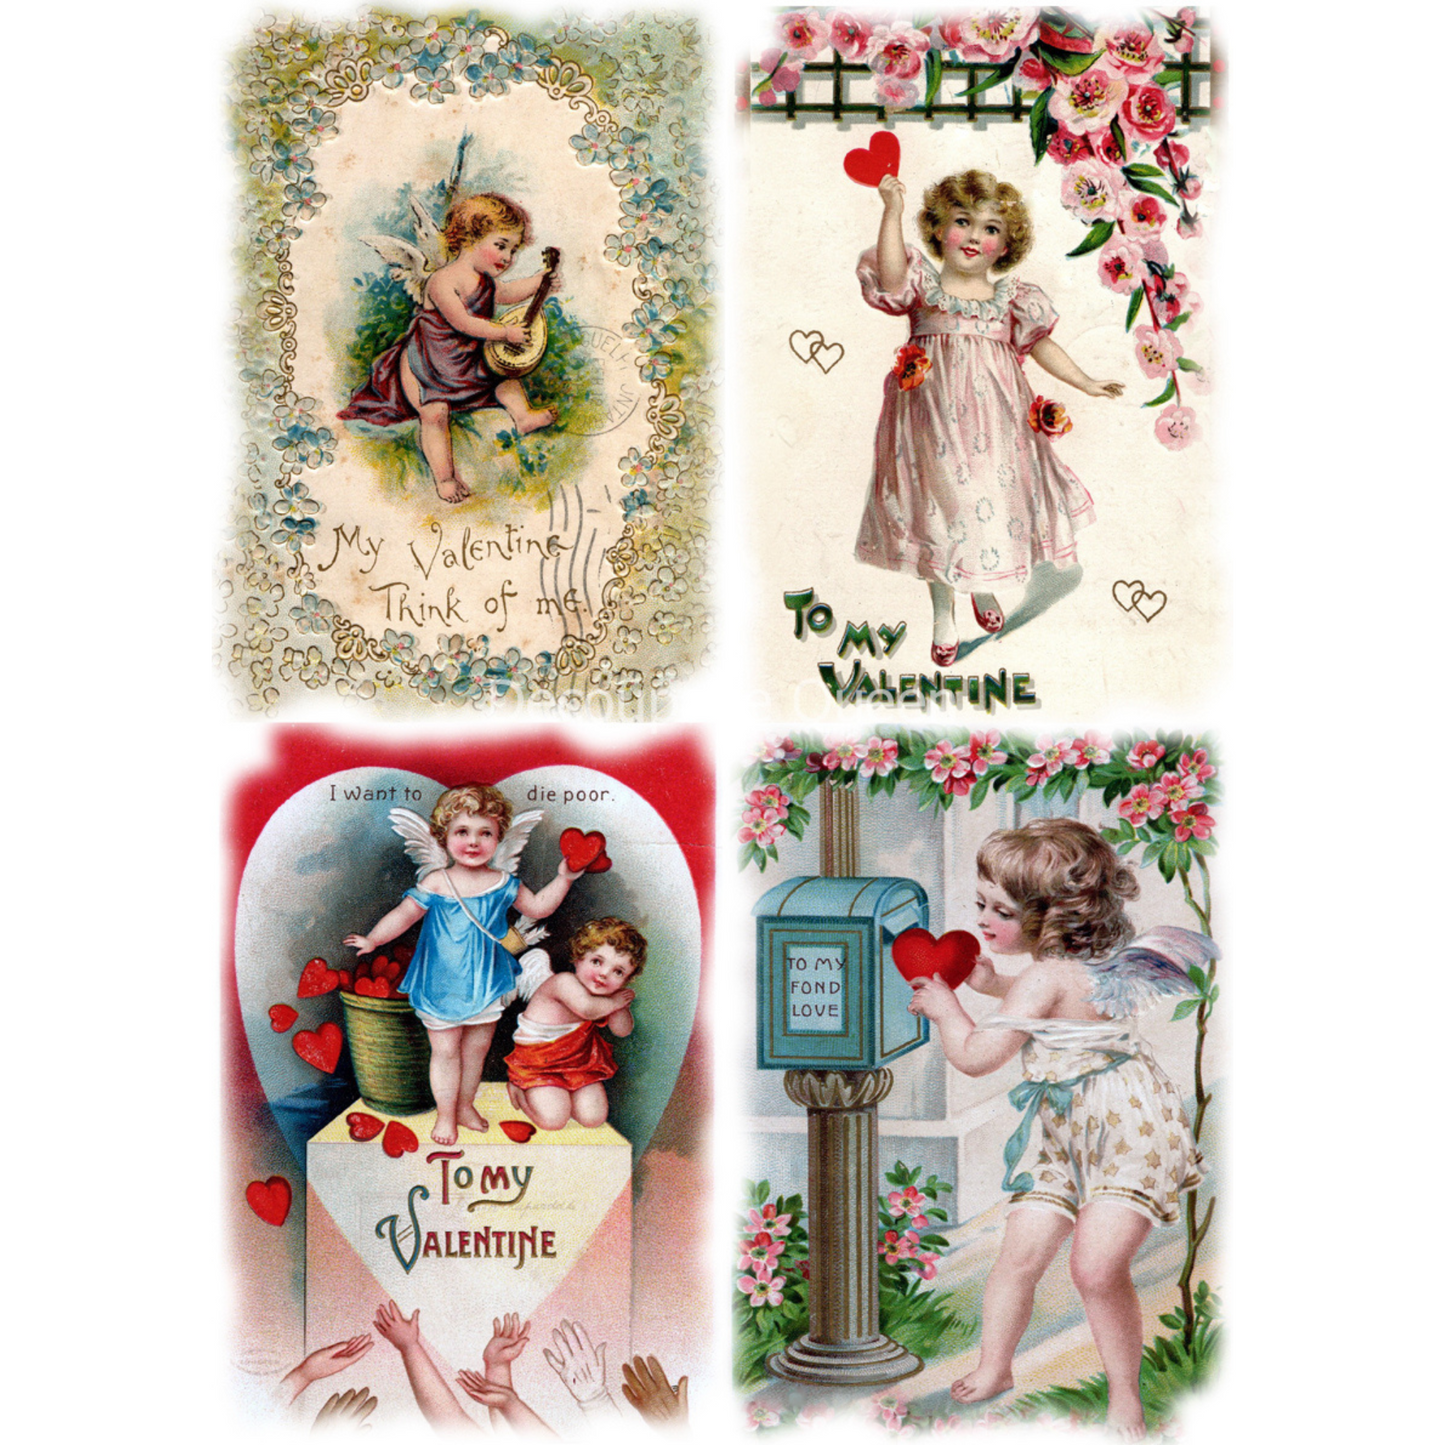 "Valentine Greetings" decoupage rice paper by Decoupage Queen. Available at Milton's Daughter